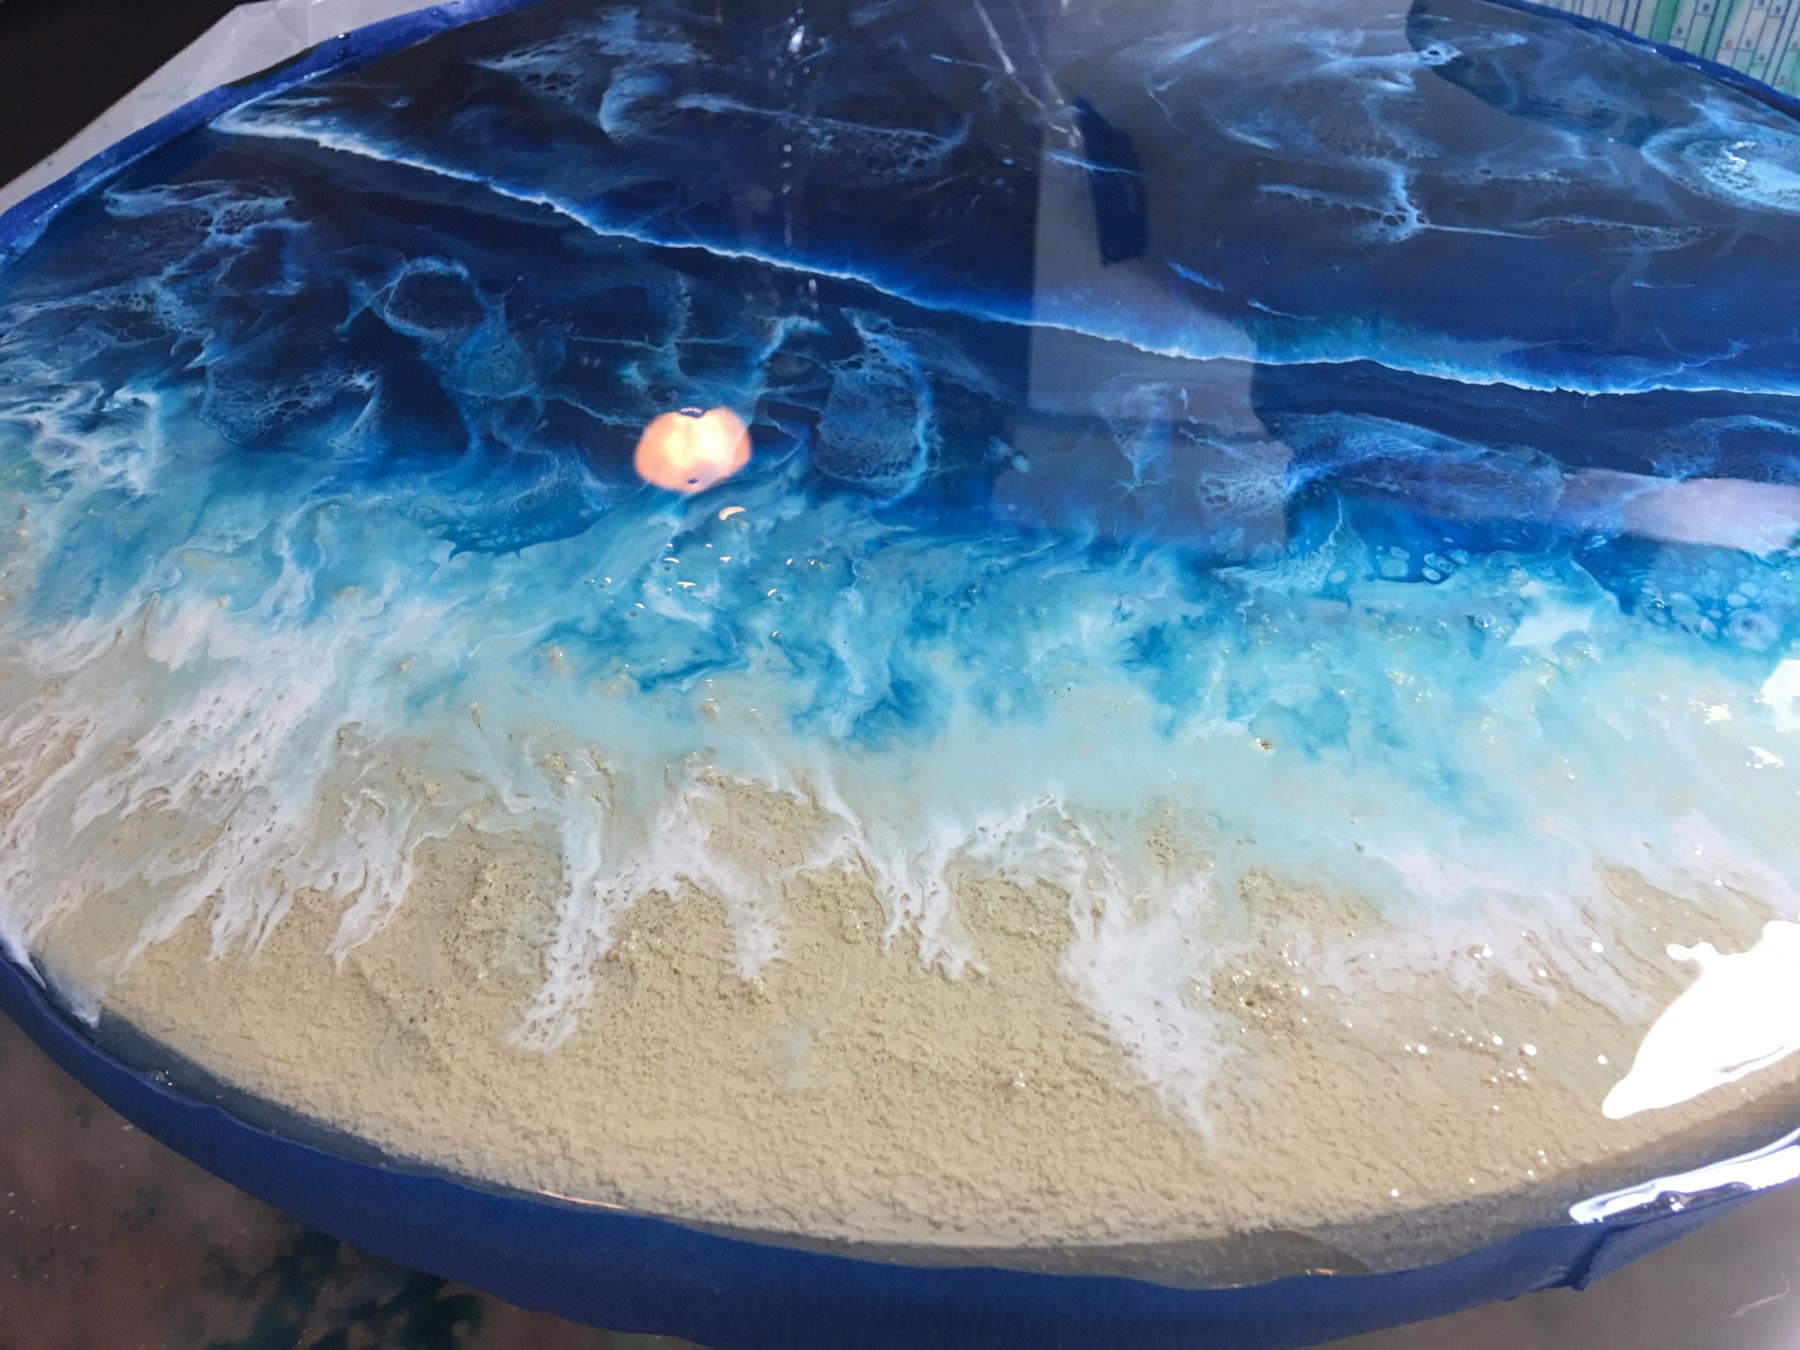 mid process of resin falling over the sand